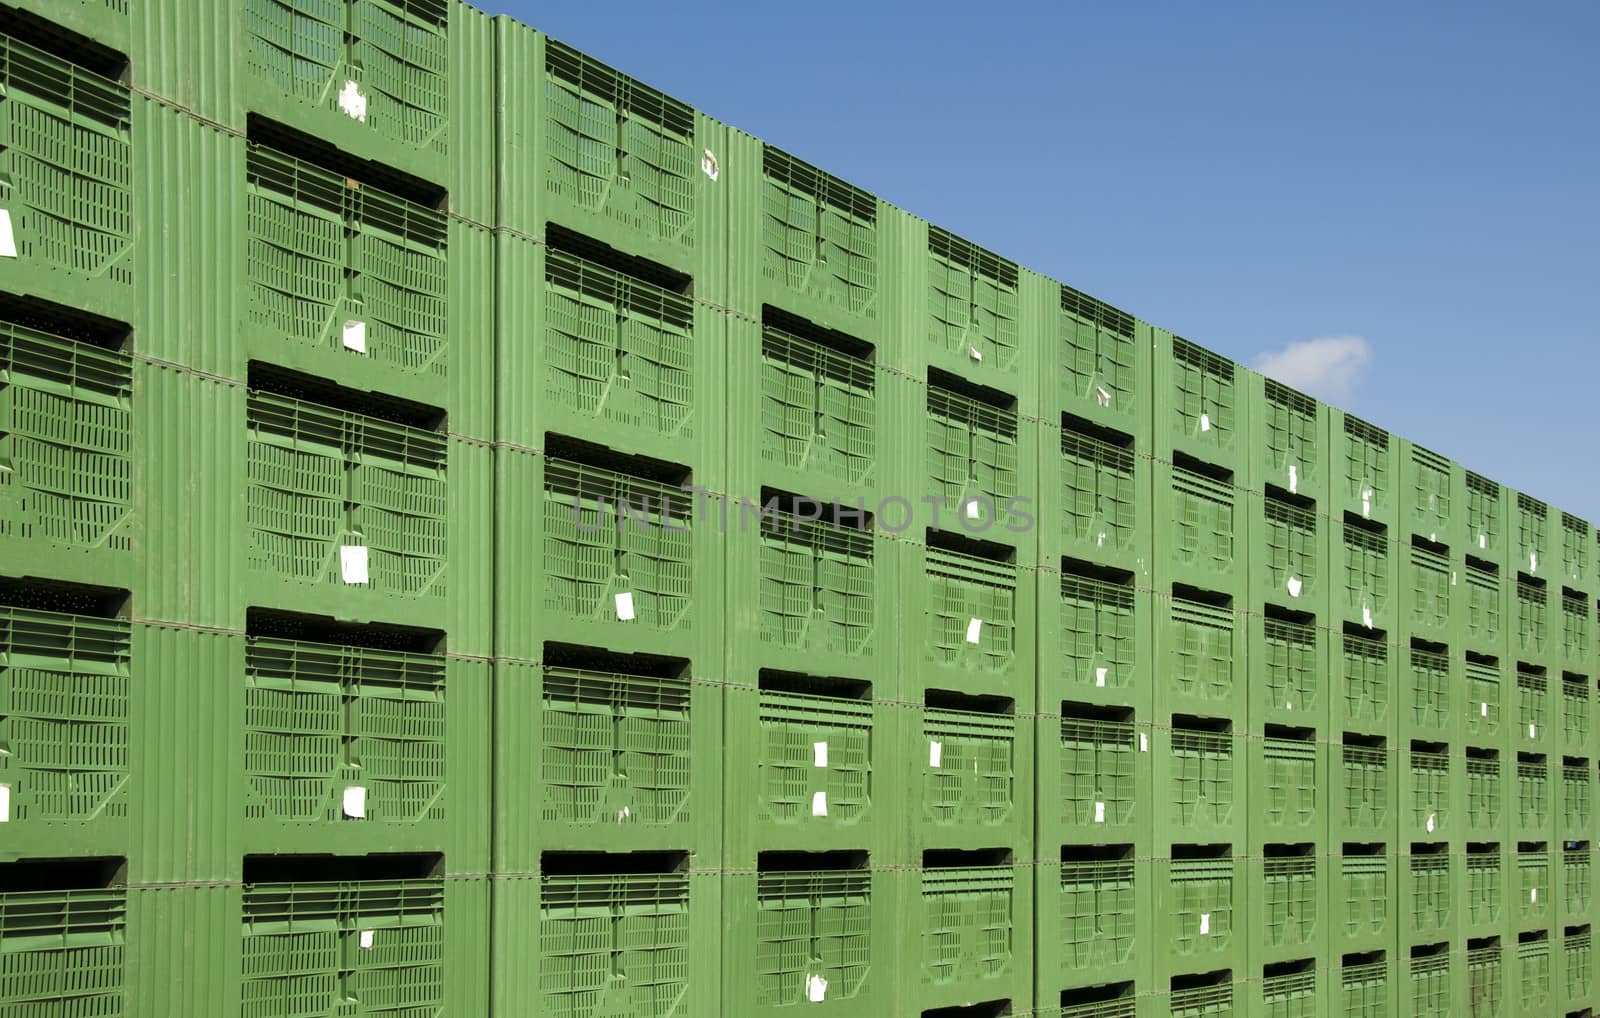 Green Fruit packing crates by jelen80